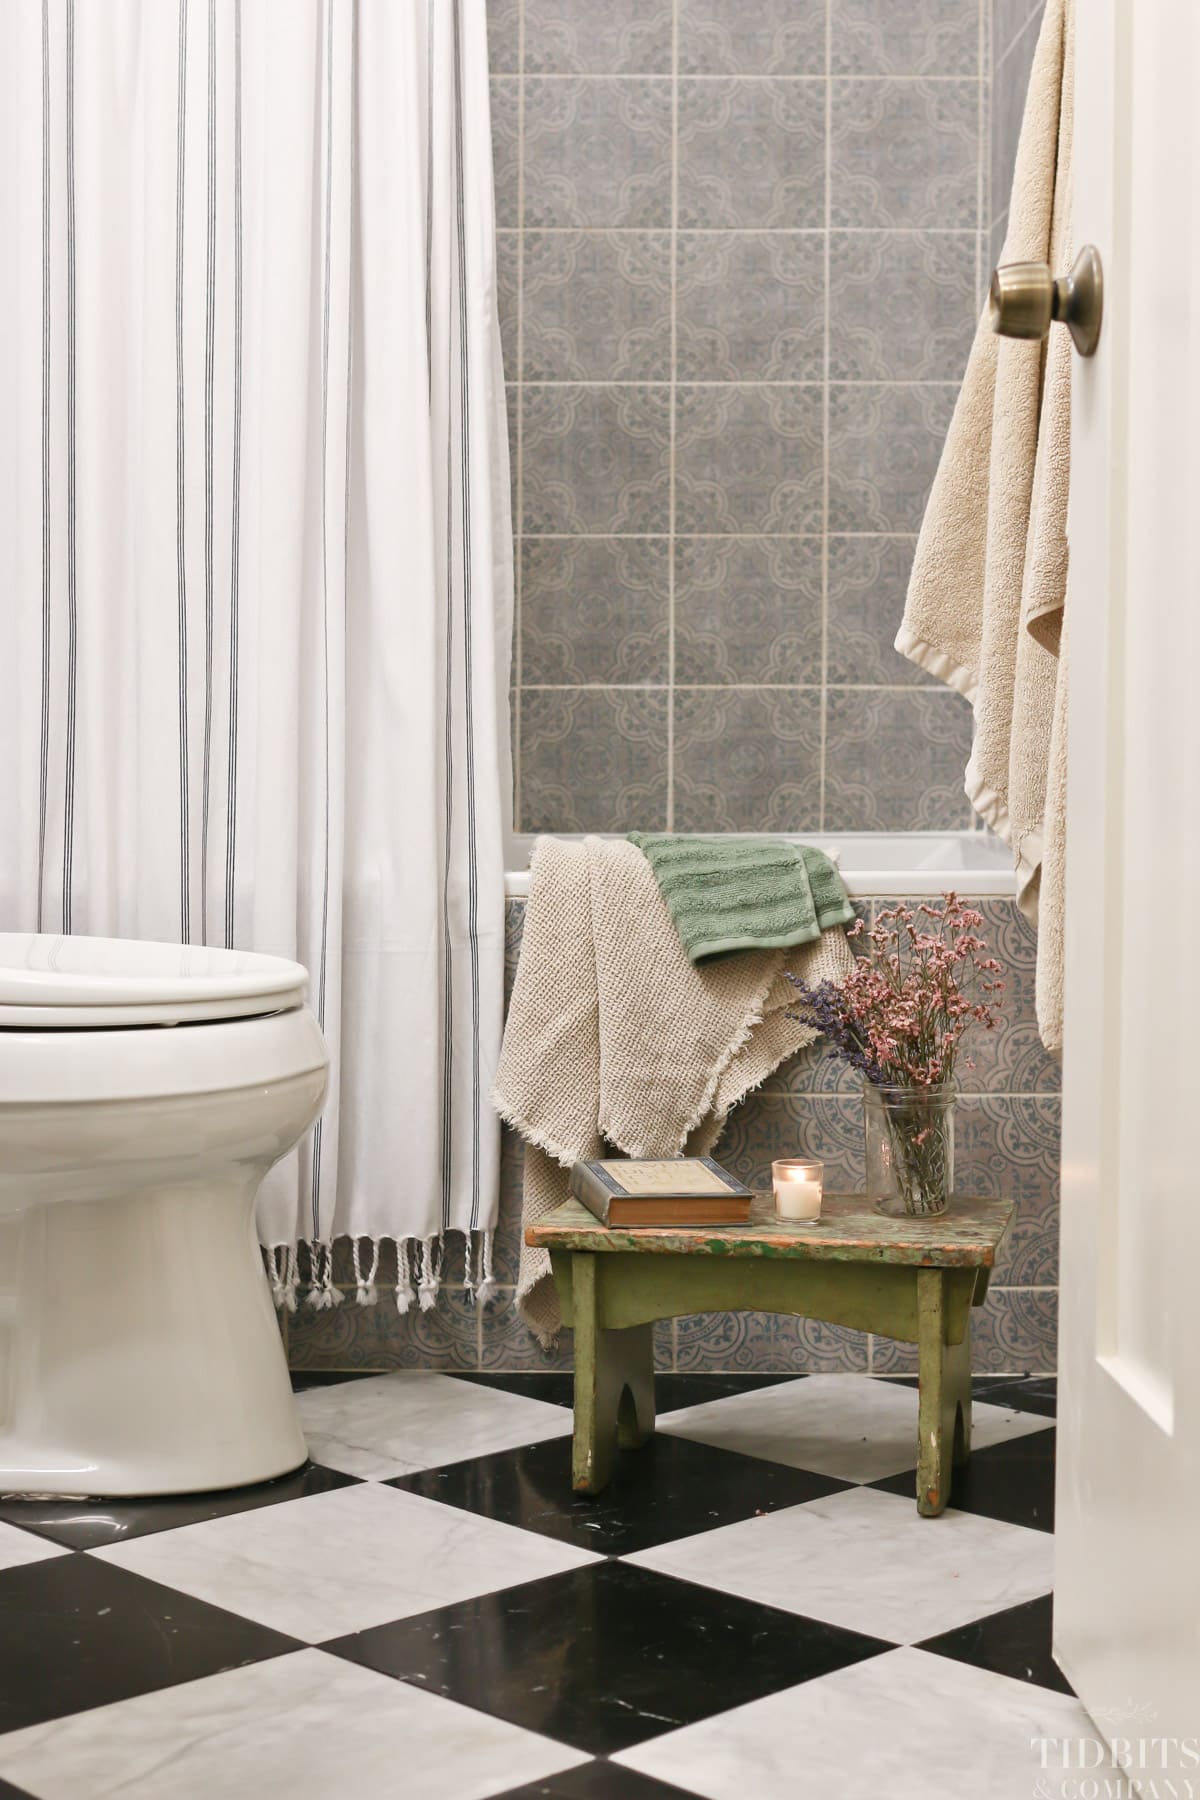 A remodeled split bathroom with marble tile floor, a stool, books, flowers and towels